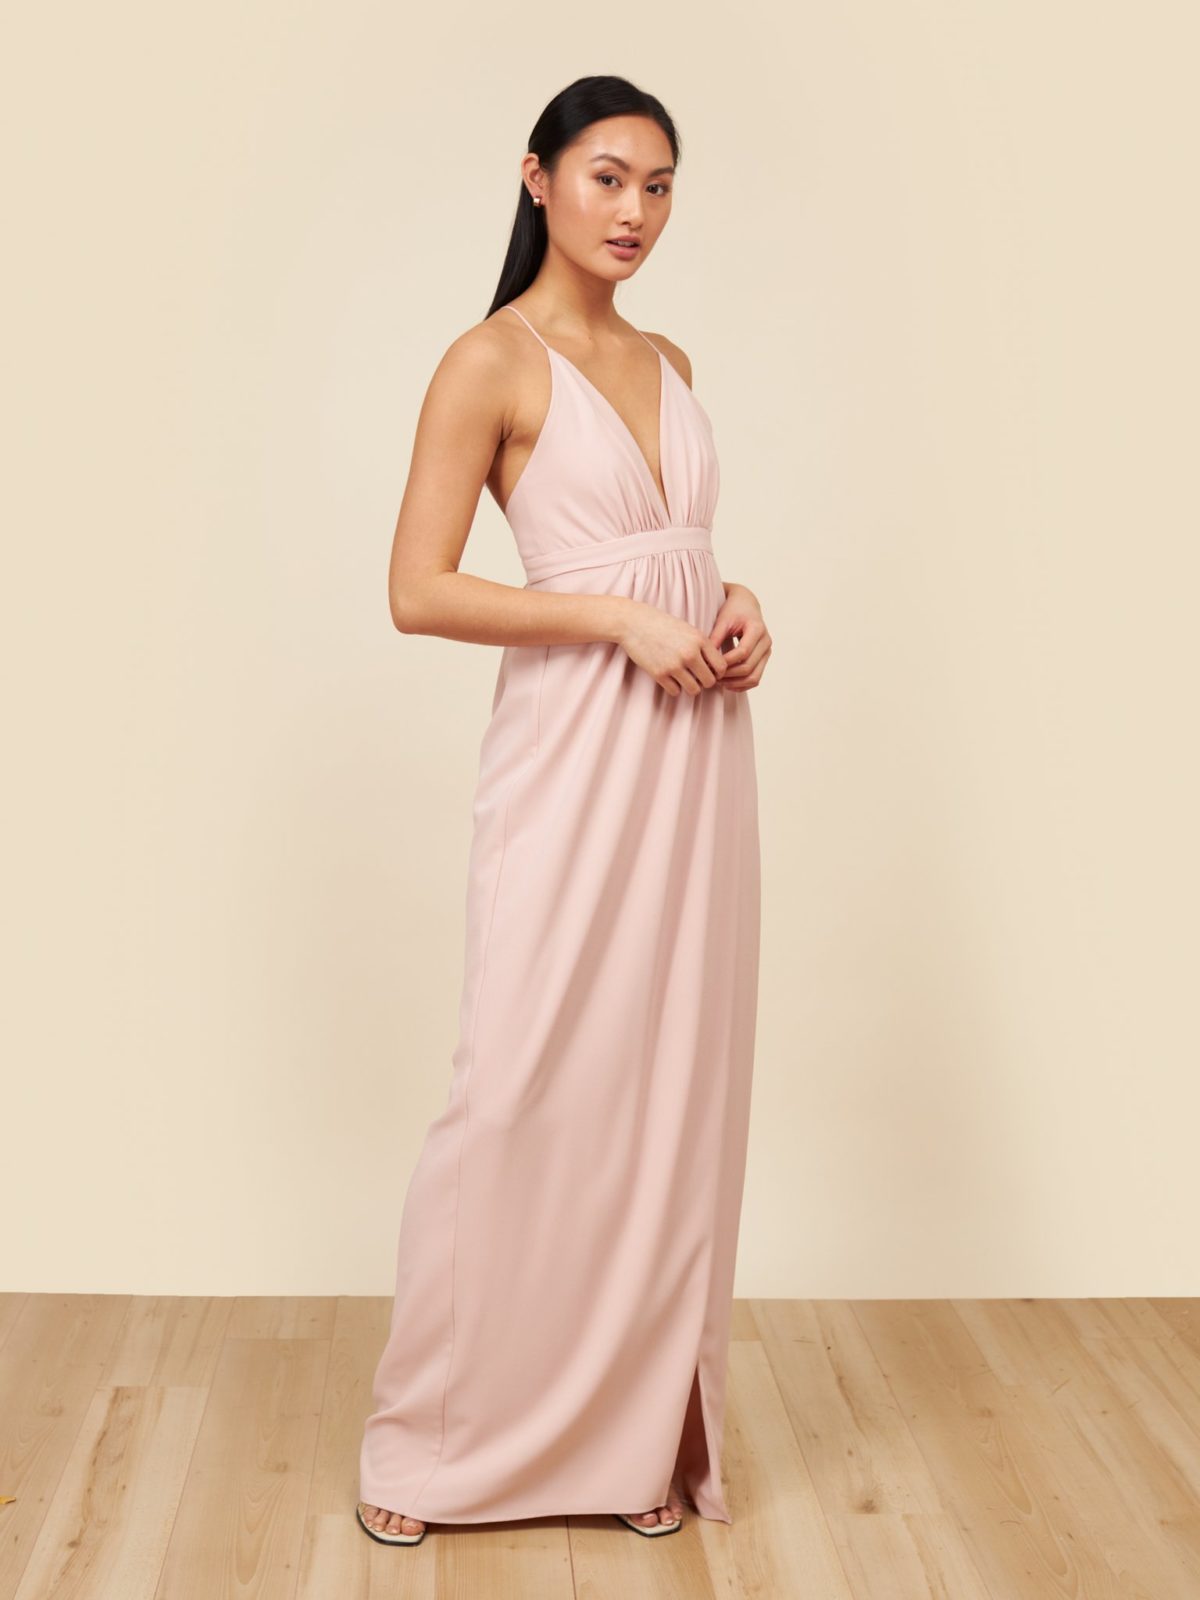 Pastel bridesmaids dresses: pink Park & Fifth Co bridesmaid dress for a spring wedding